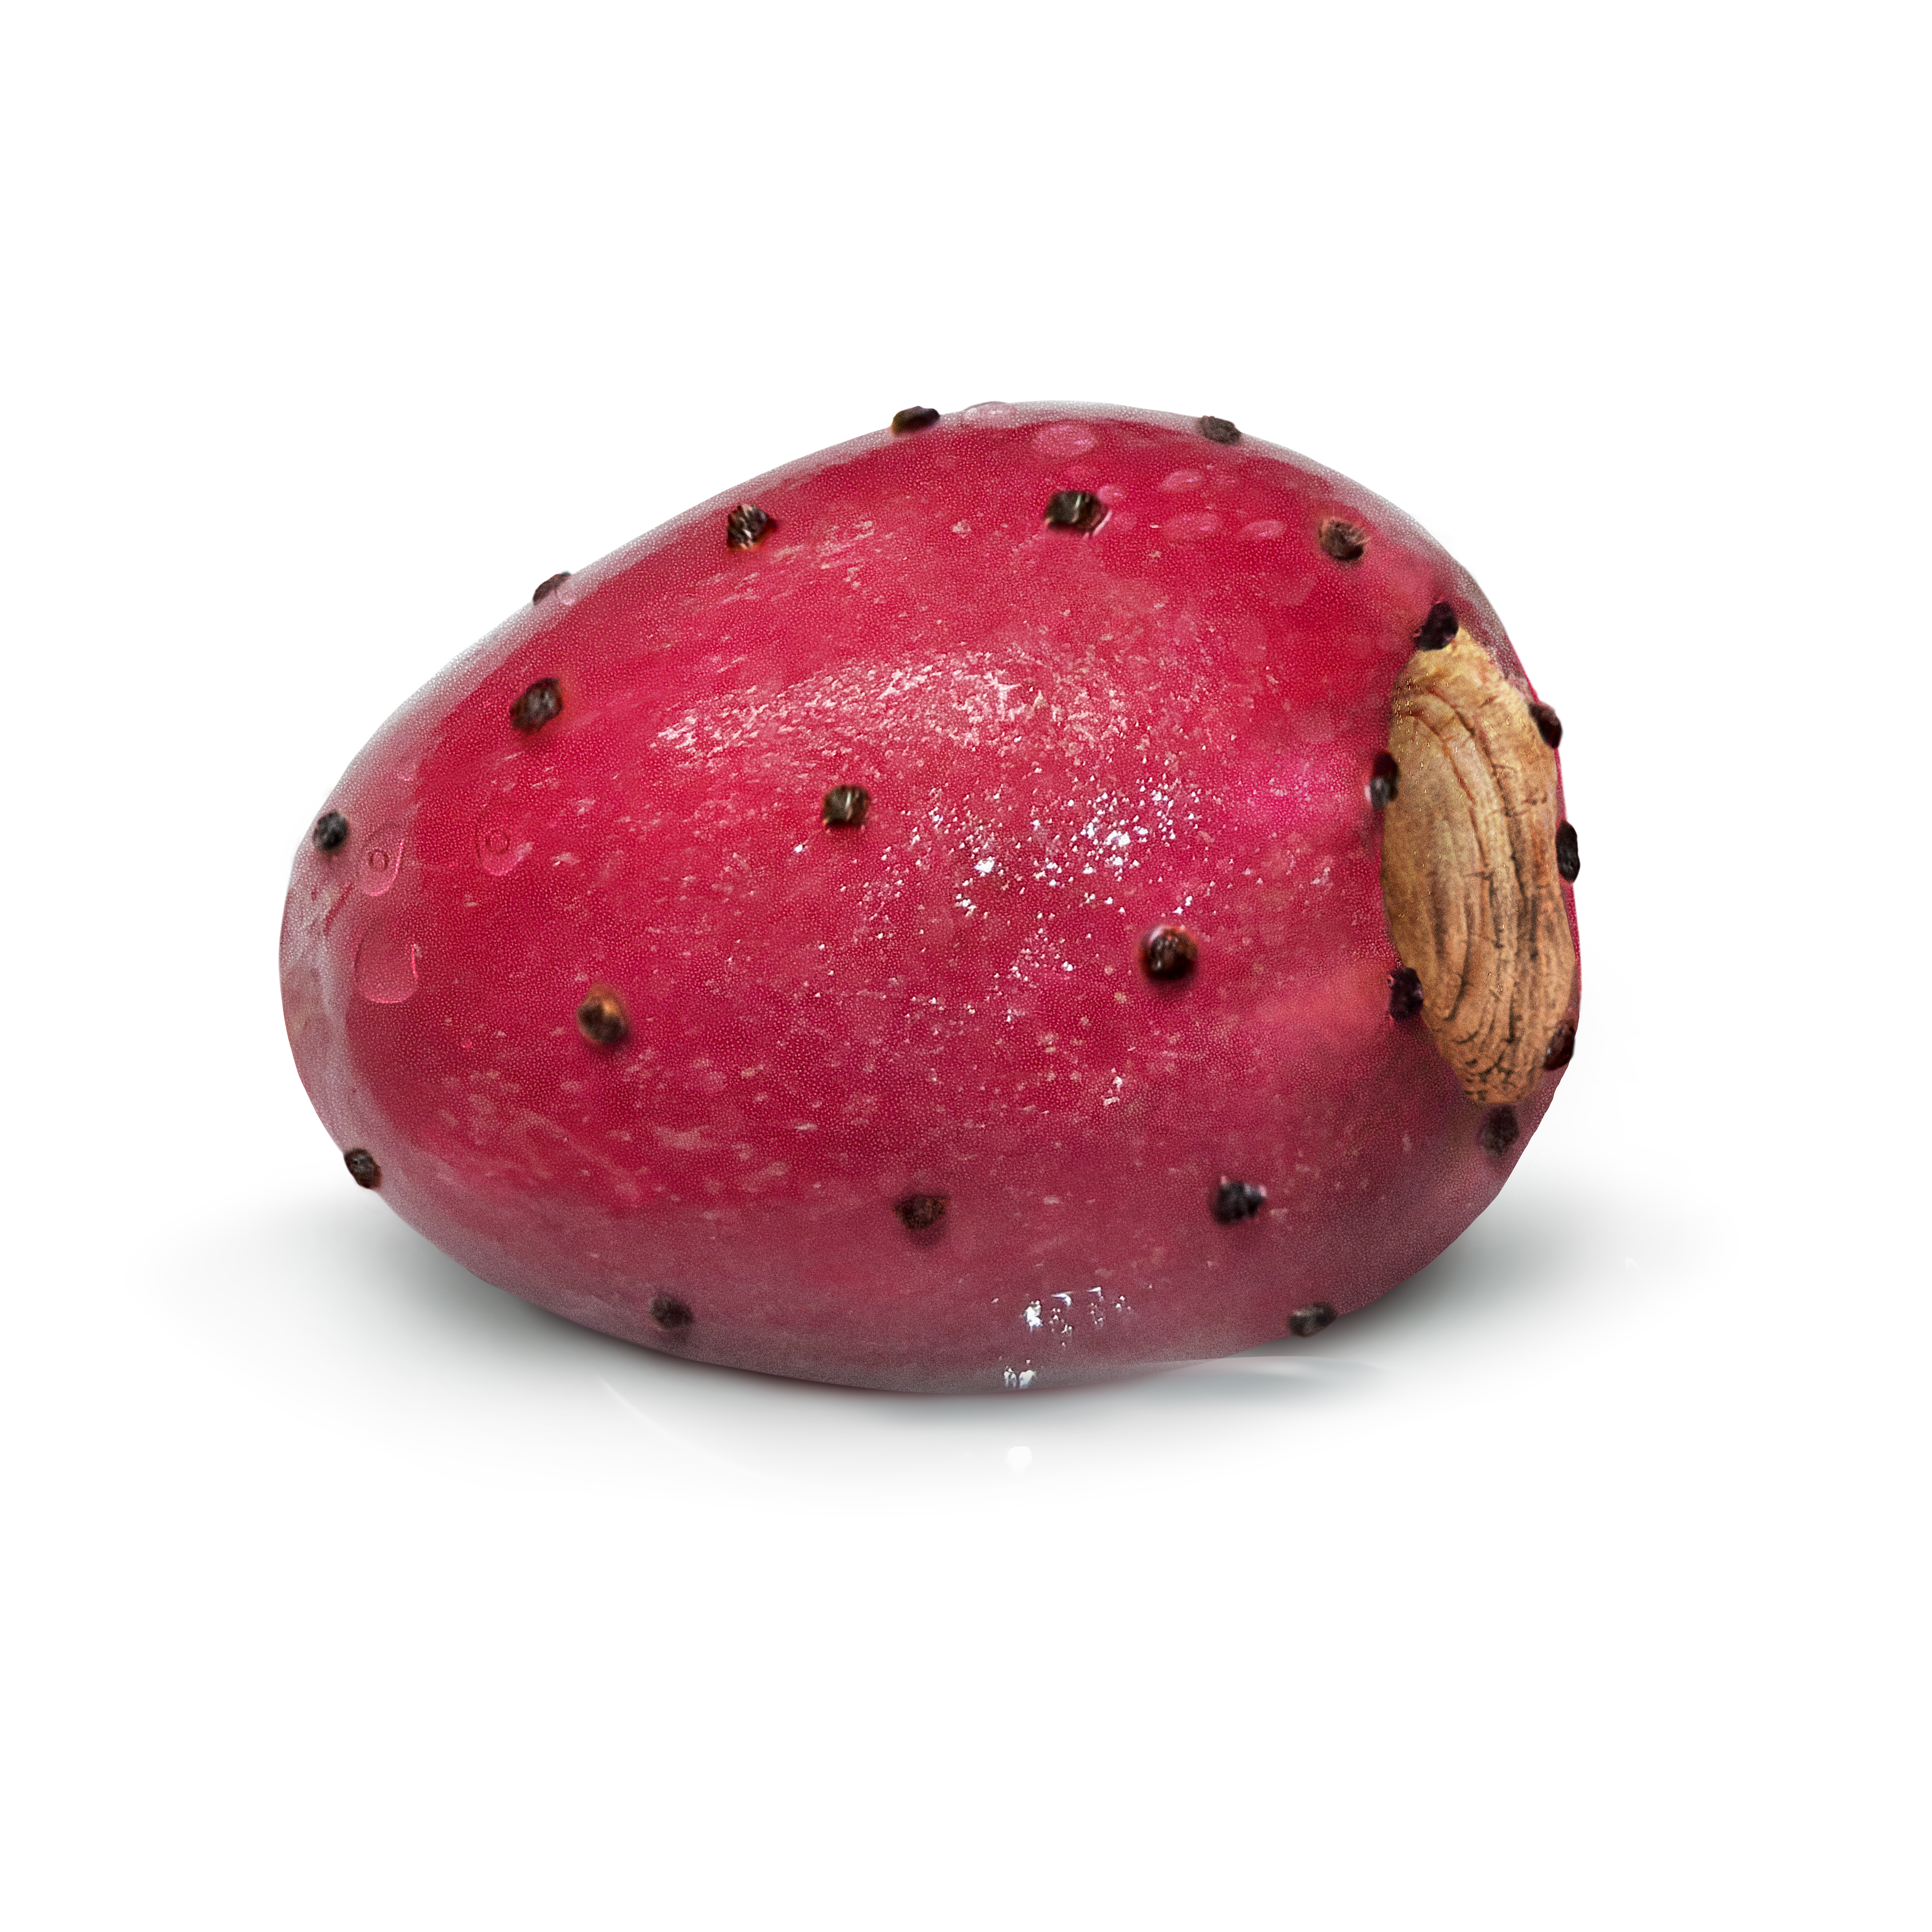 A bright magenta-coloured fruit in the shape of a pear with black dots all over.